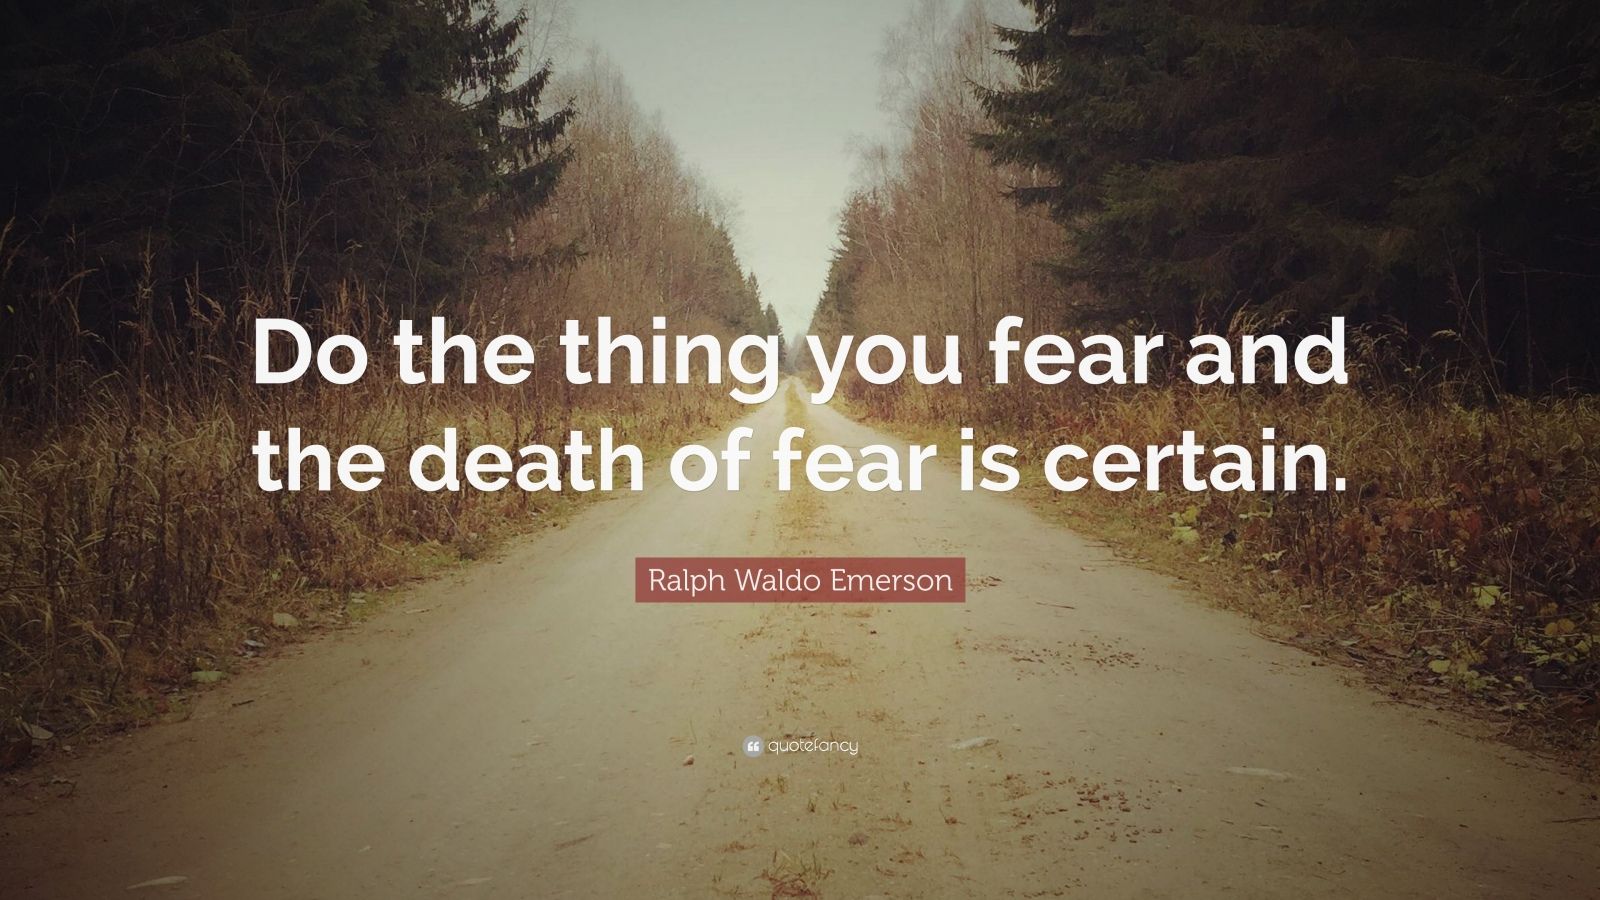 do the thing you fear most and the death of fear is certain essay